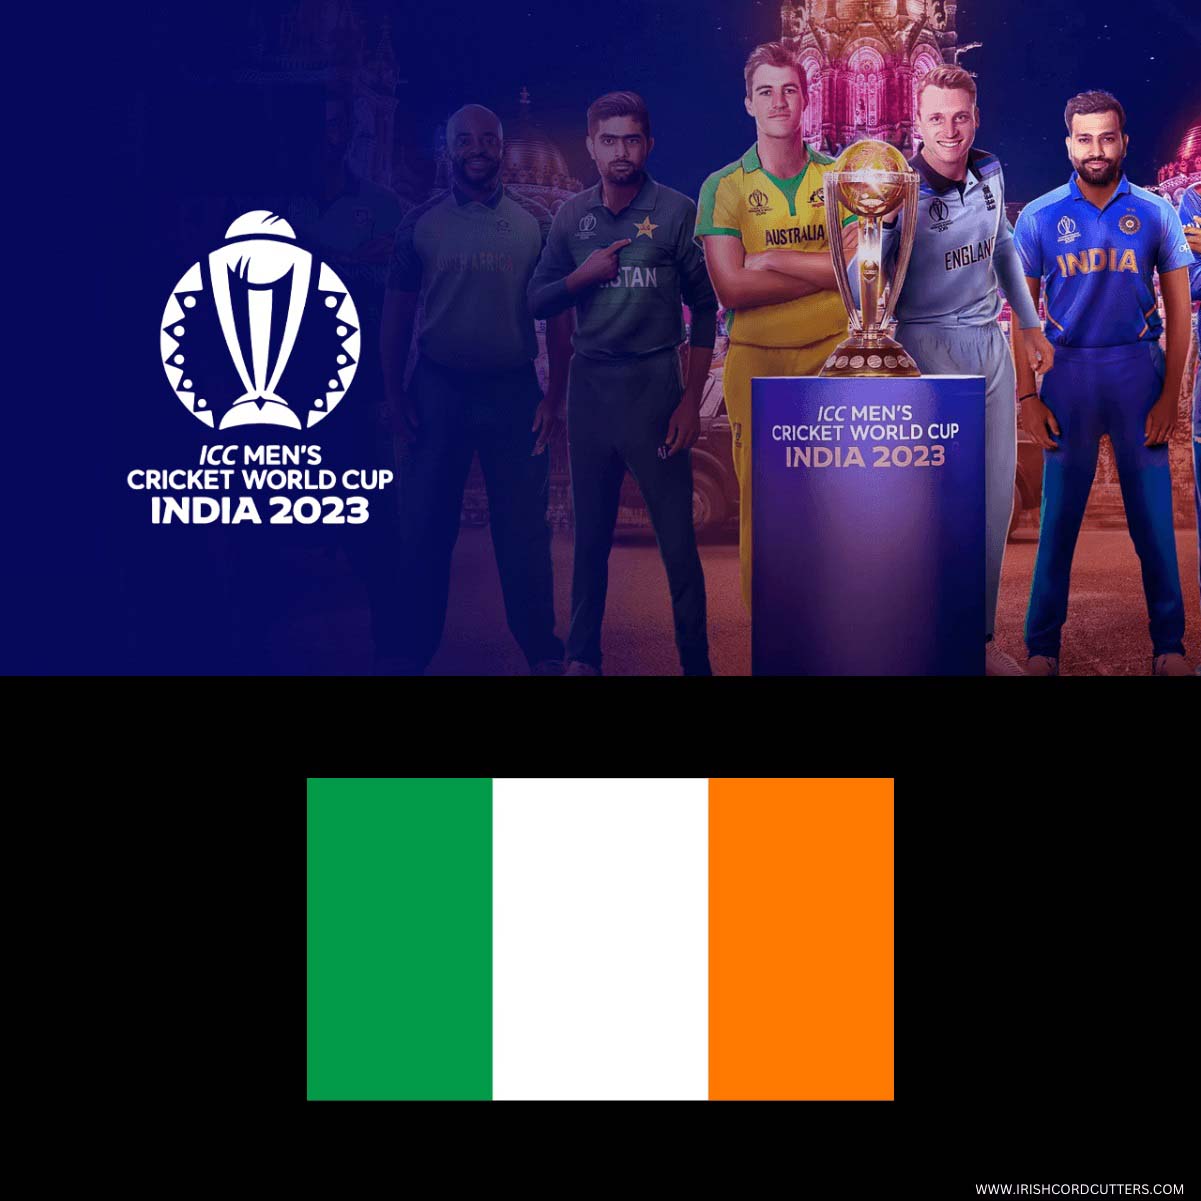 How to Watch ICC World Cup Final in Ireland [Free + Live 2023]